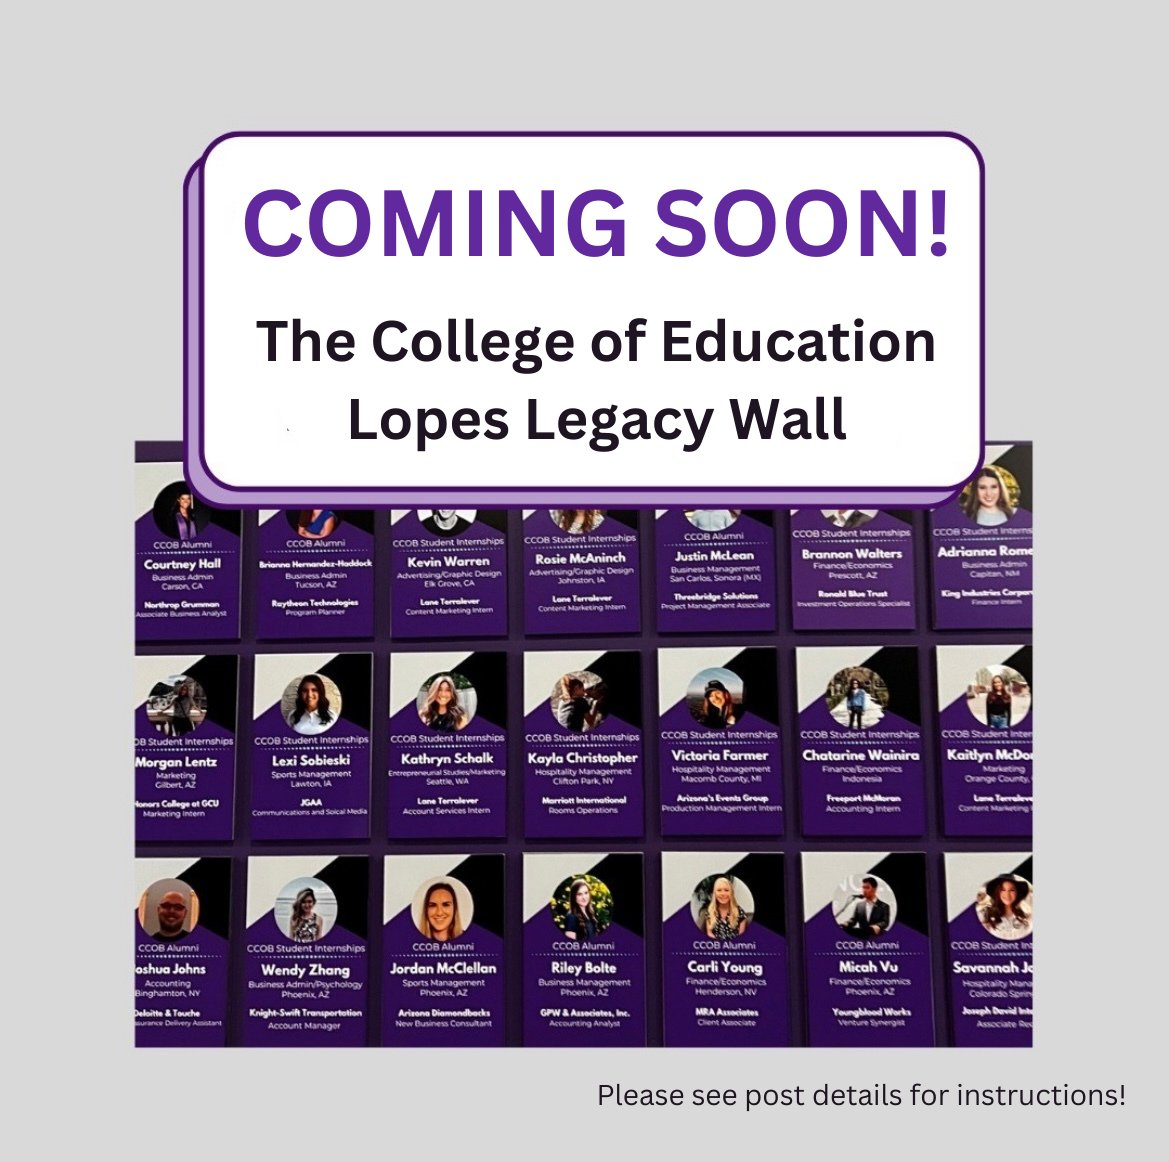 Attention Alumni! Please share your story if you want to be considered for our new Lopes Legacy Wall! Link: ow.ly/Iy2f50PfHwr #lopesteachup